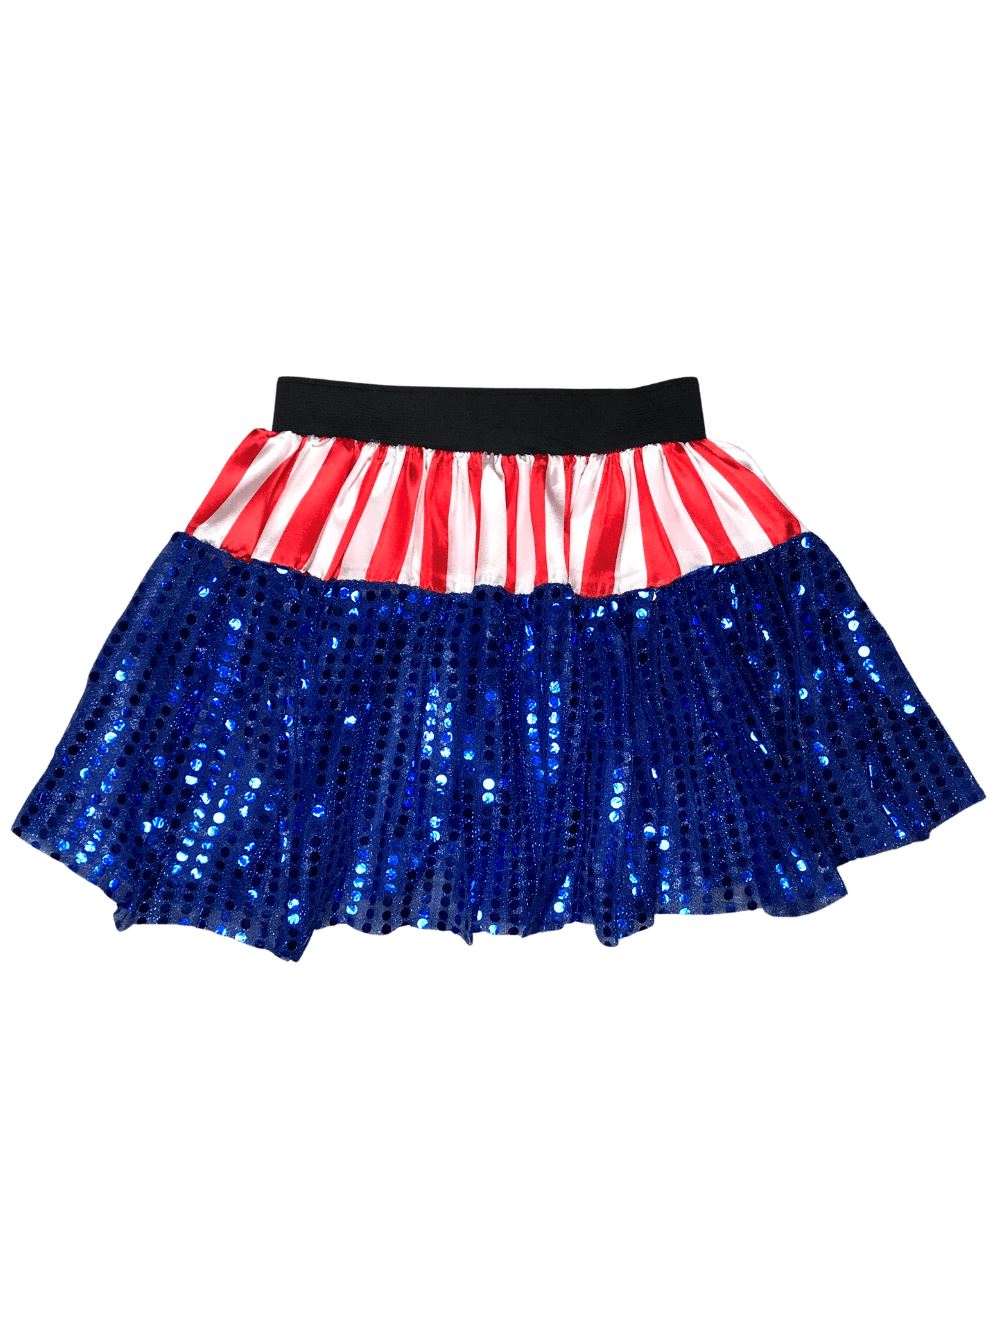 Captain America Sequined Costume Tutu Skirt in Kid, Adult, or Plus Size - Sydney So Sweet